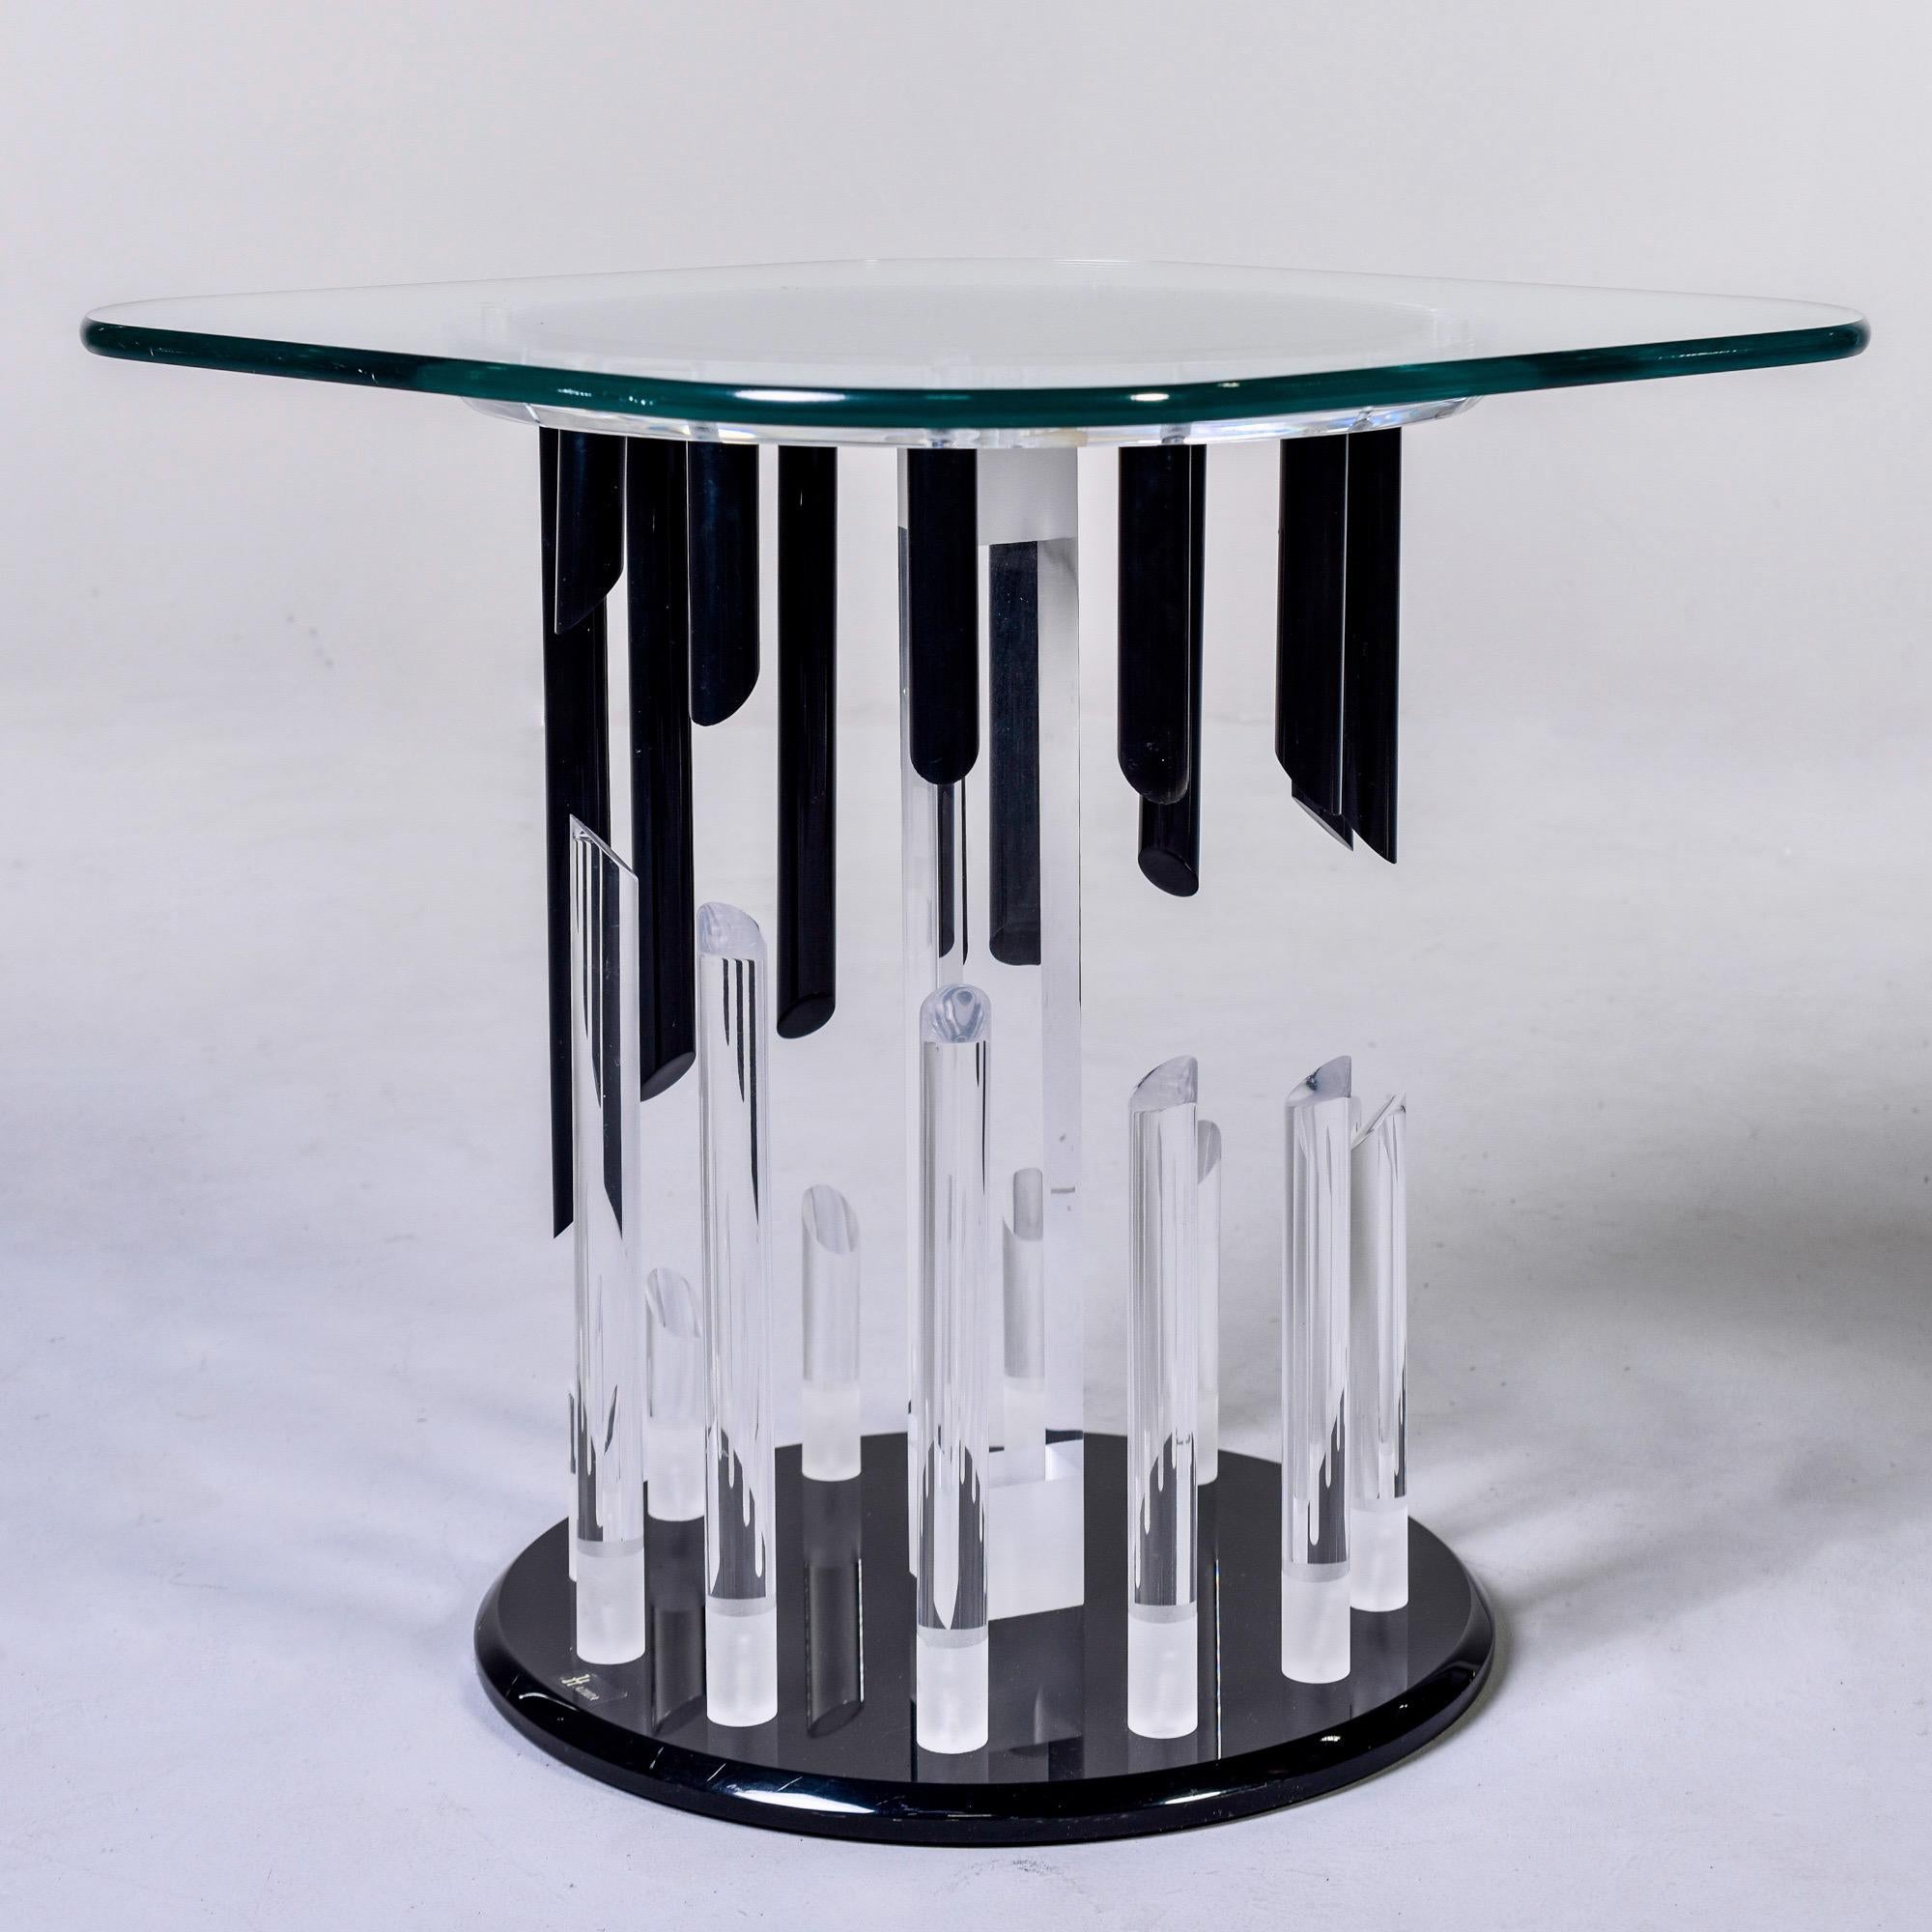 Side table with a Lucite base by Haziza, circa 1980s. Table has a black Lucite base with clear and black Lucite rods with diagonally cut ends that form an abstract pattern. Top of base is clear Lucite and tabletop is a glass square with rounded